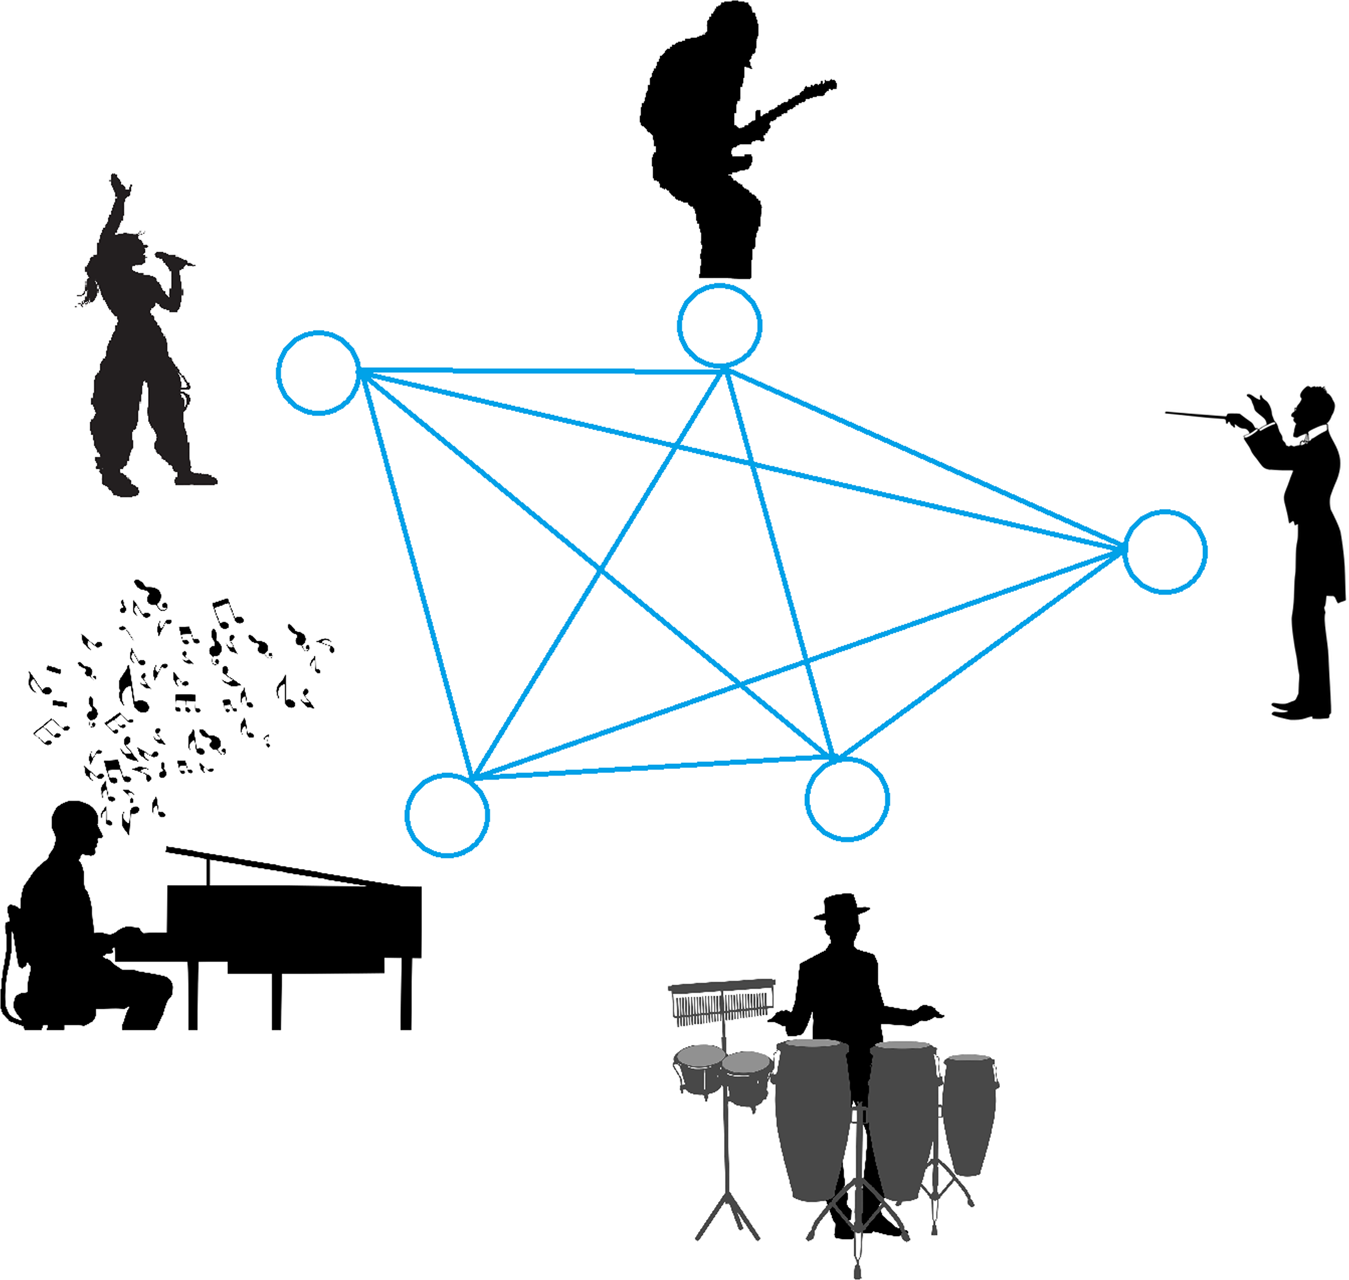 The Cyborg Philharmonic: Synchronizing interactive musical performances  between humans and machines